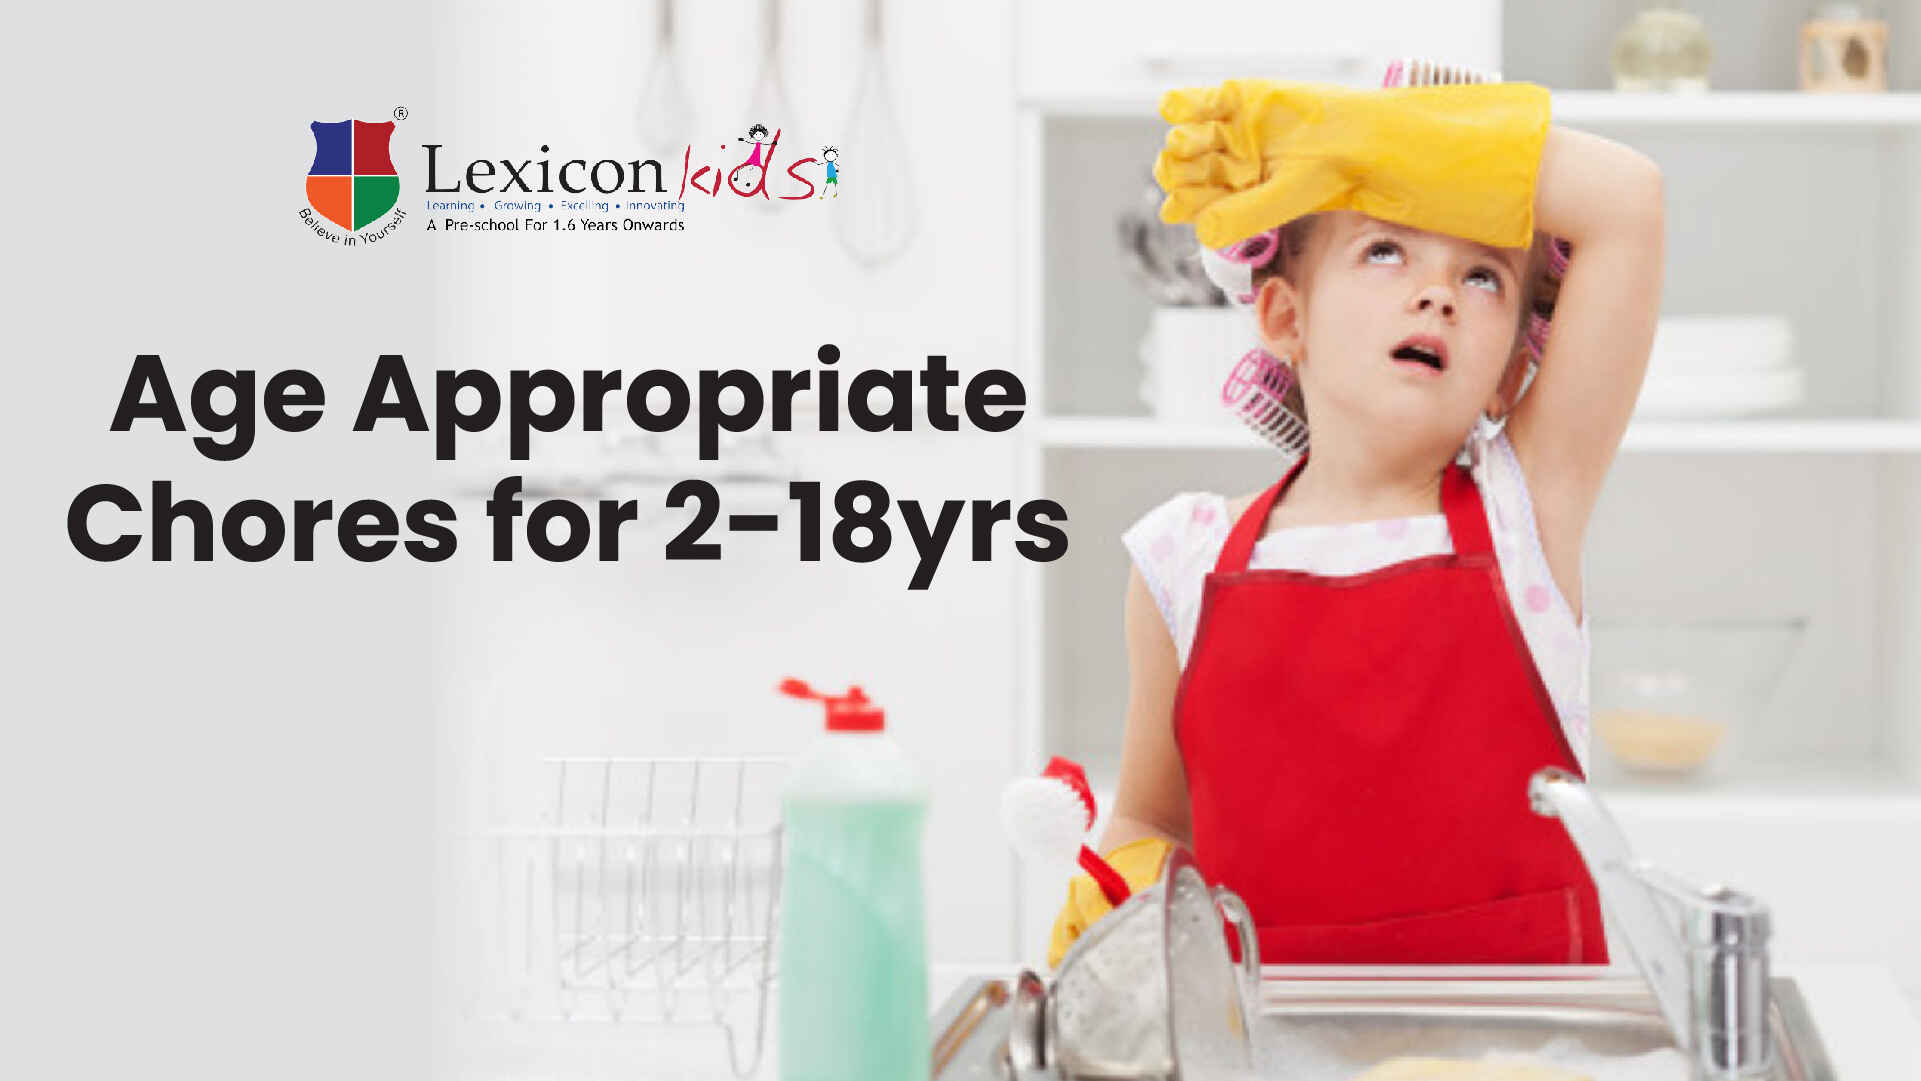 age-appropriate-chores-for-2-18yrs